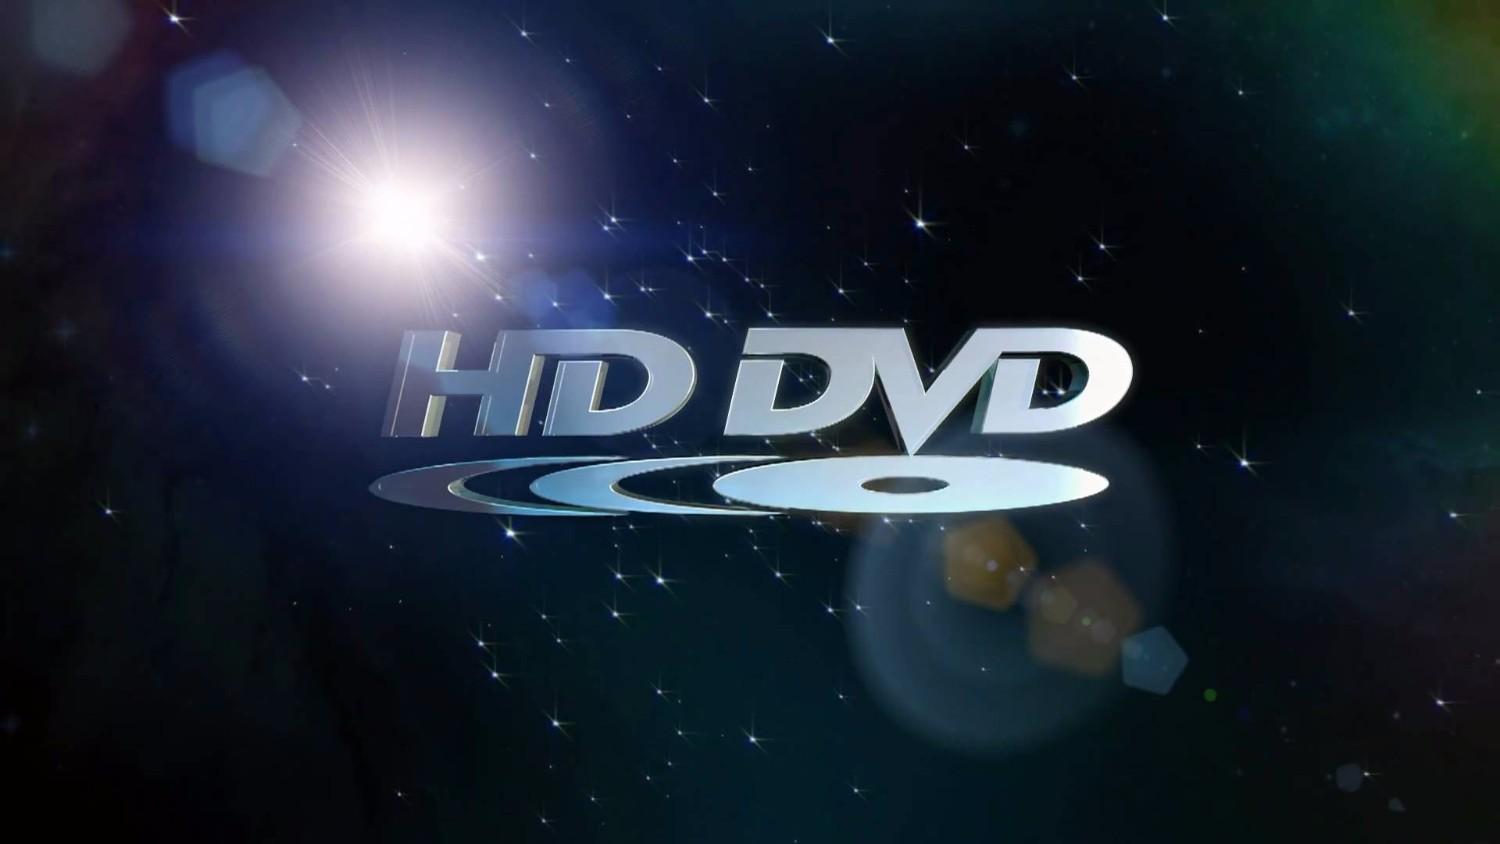 Toshiba HD-DVD HD-A20 Rollback Firmware - HD-A20 Ver 2.7 rollback - Physical CD - NEW - UK SELLER